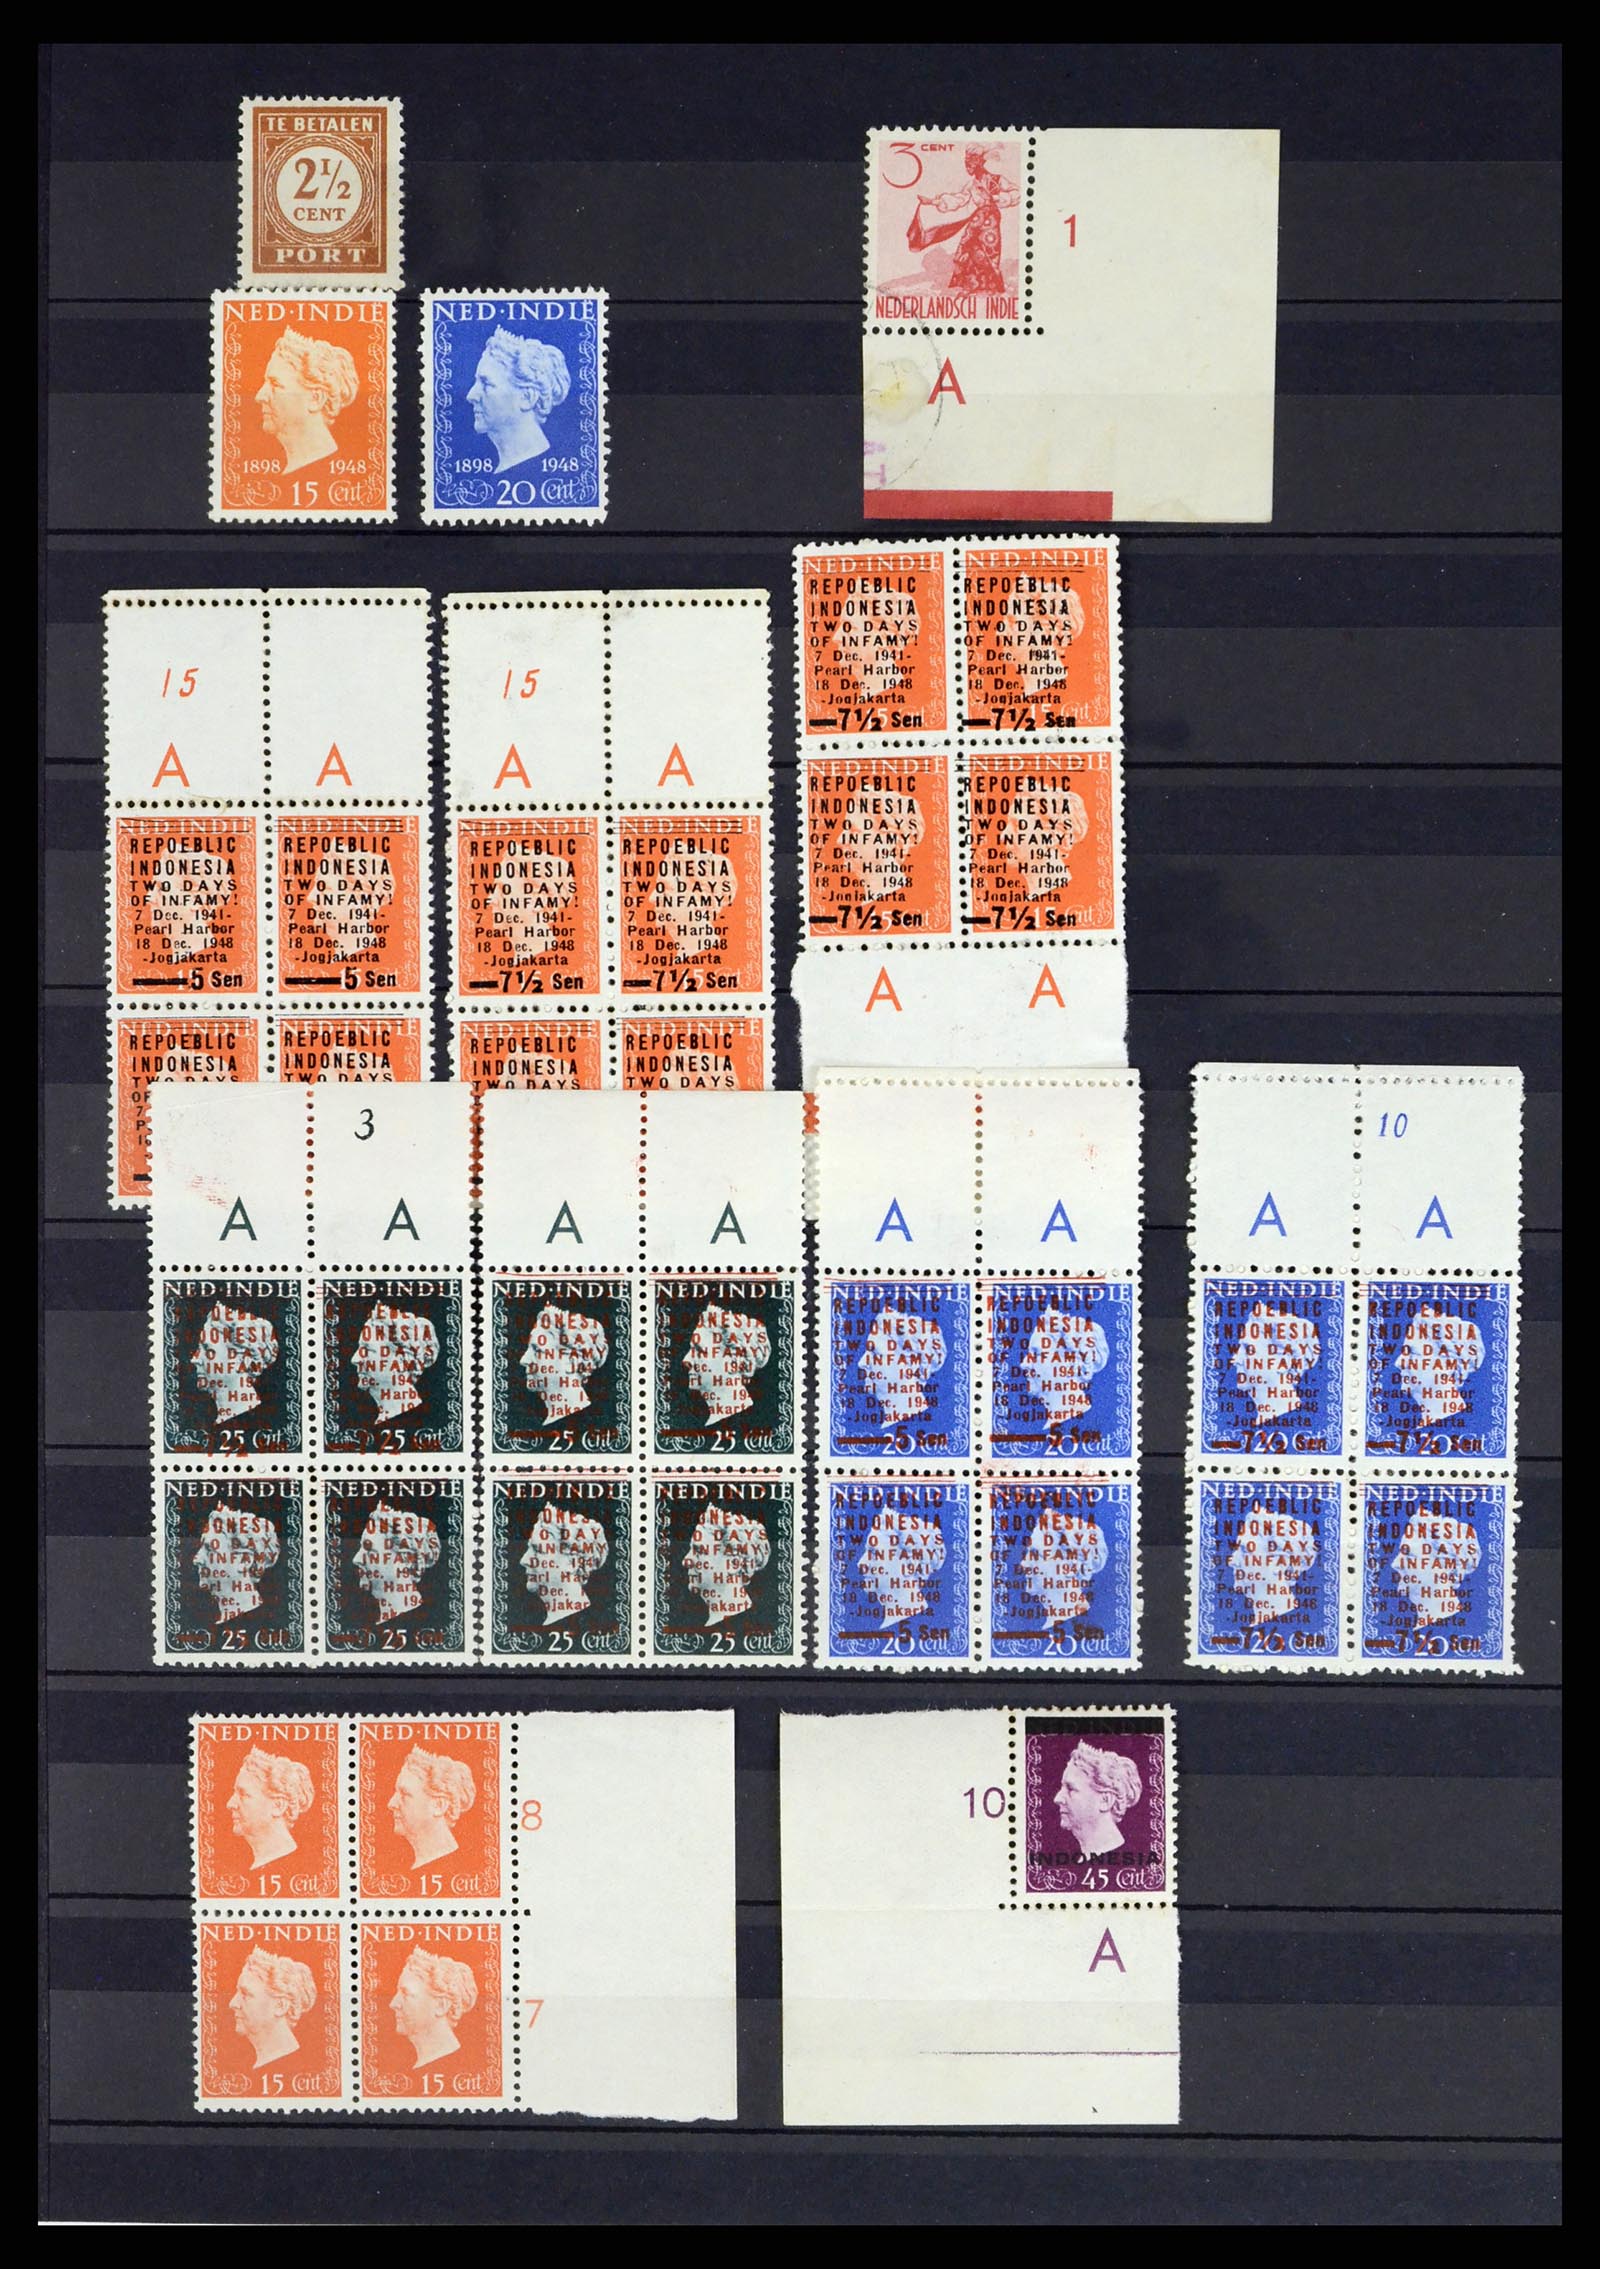 37432 052 - Stamp collection 37432 Japanese occupation and interim period Dutch east